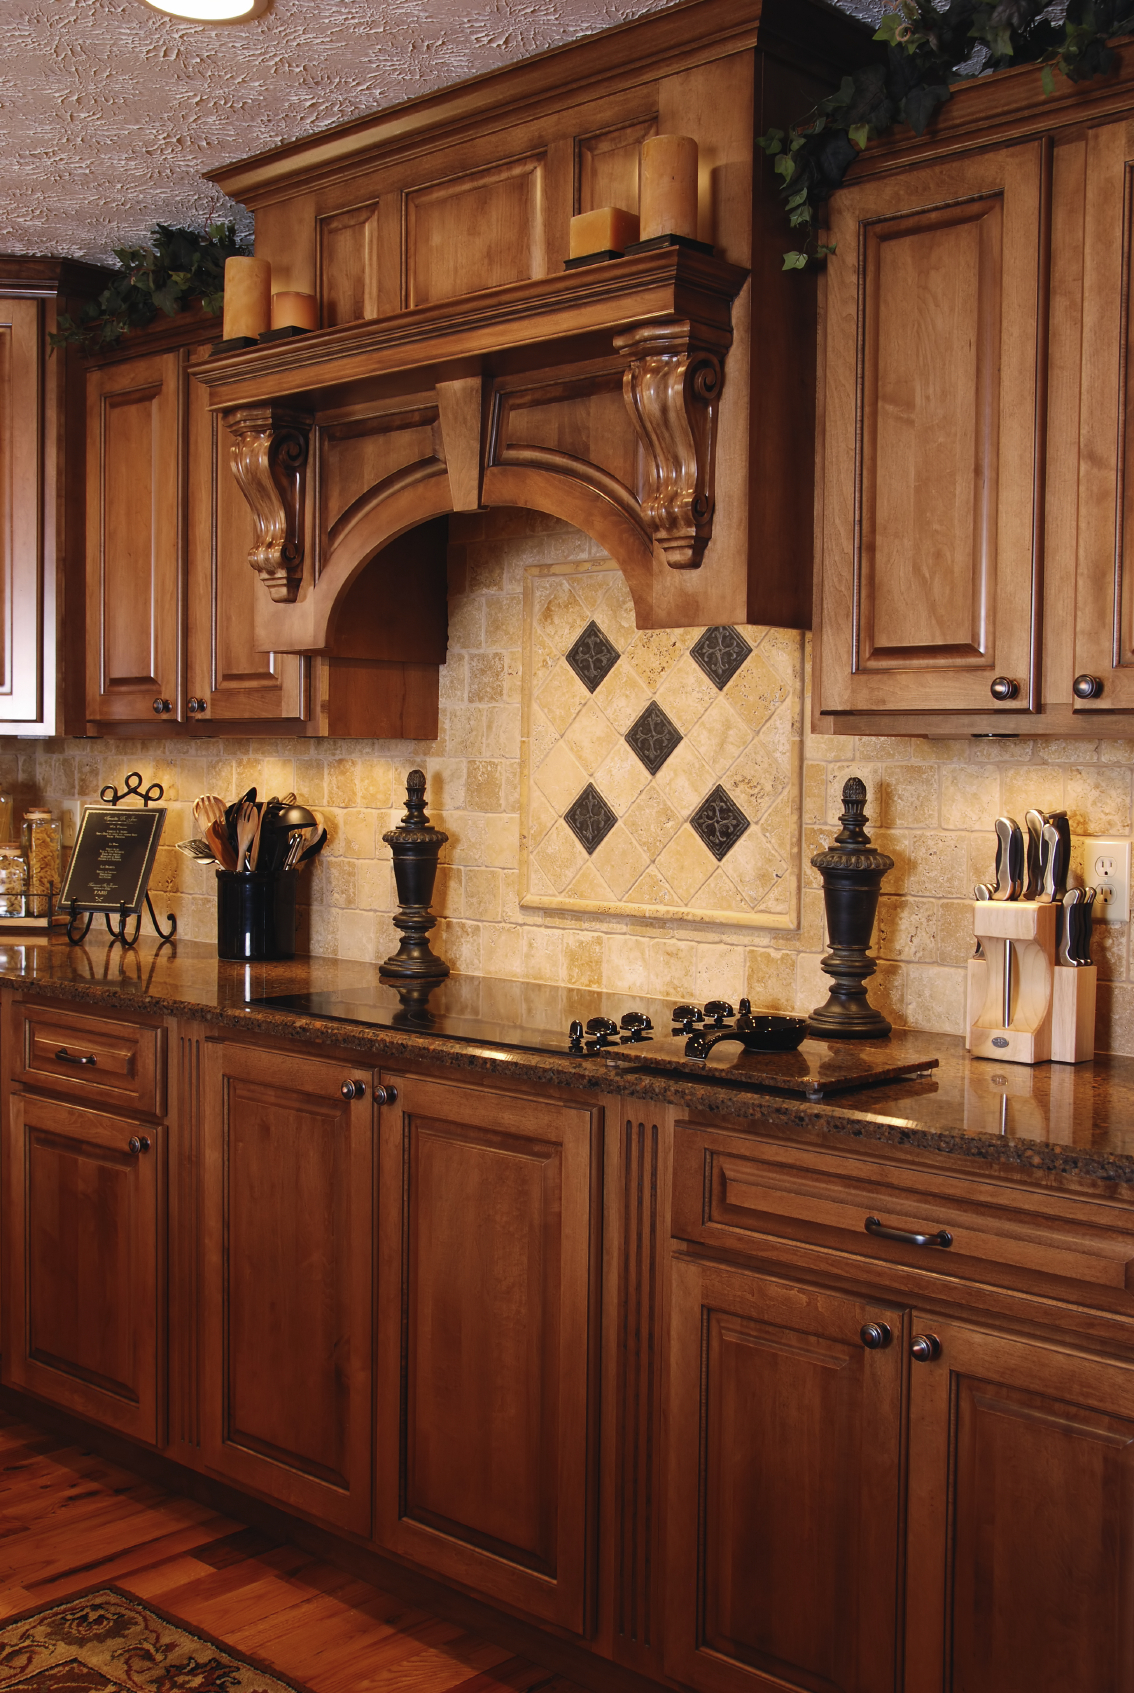 Do You Need Custom Kitchen Cabinets For Your Remodel